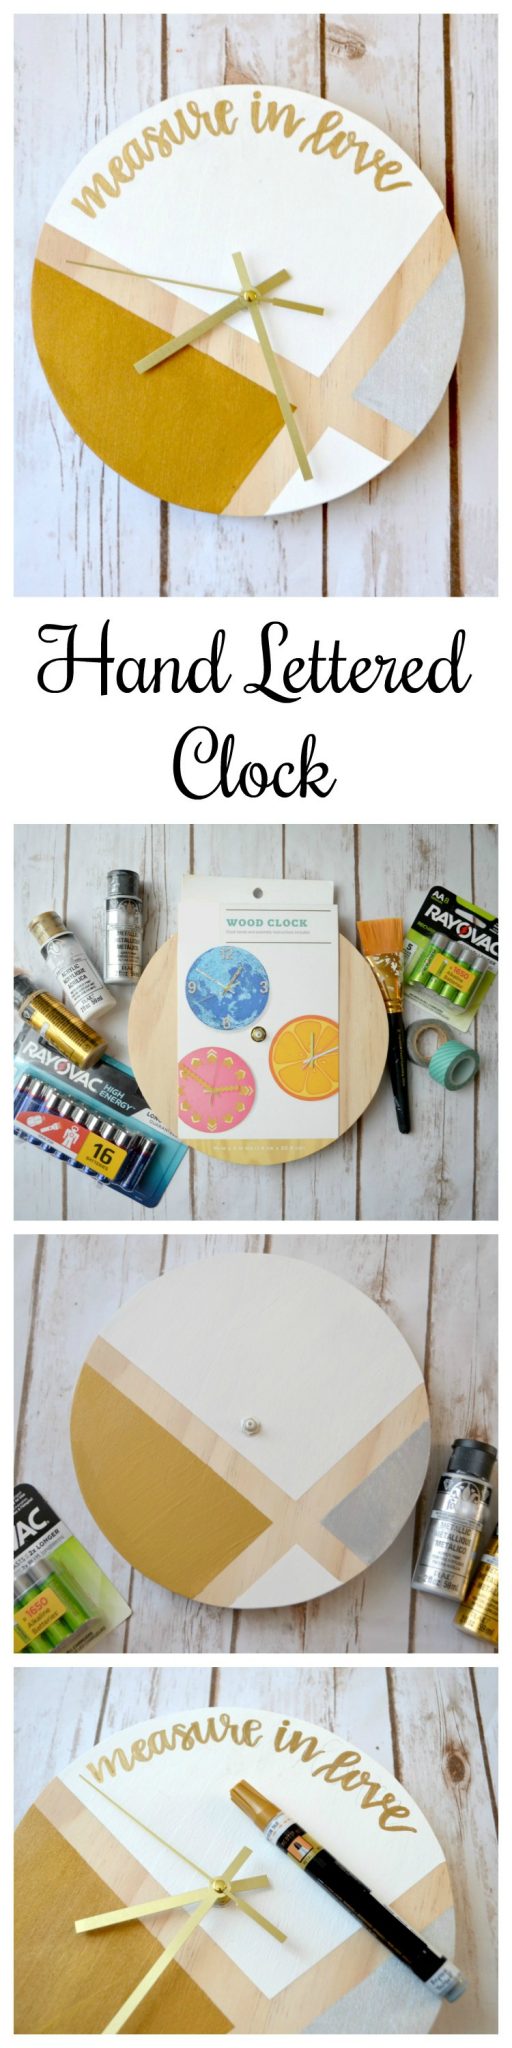 Hand Lettered Clock